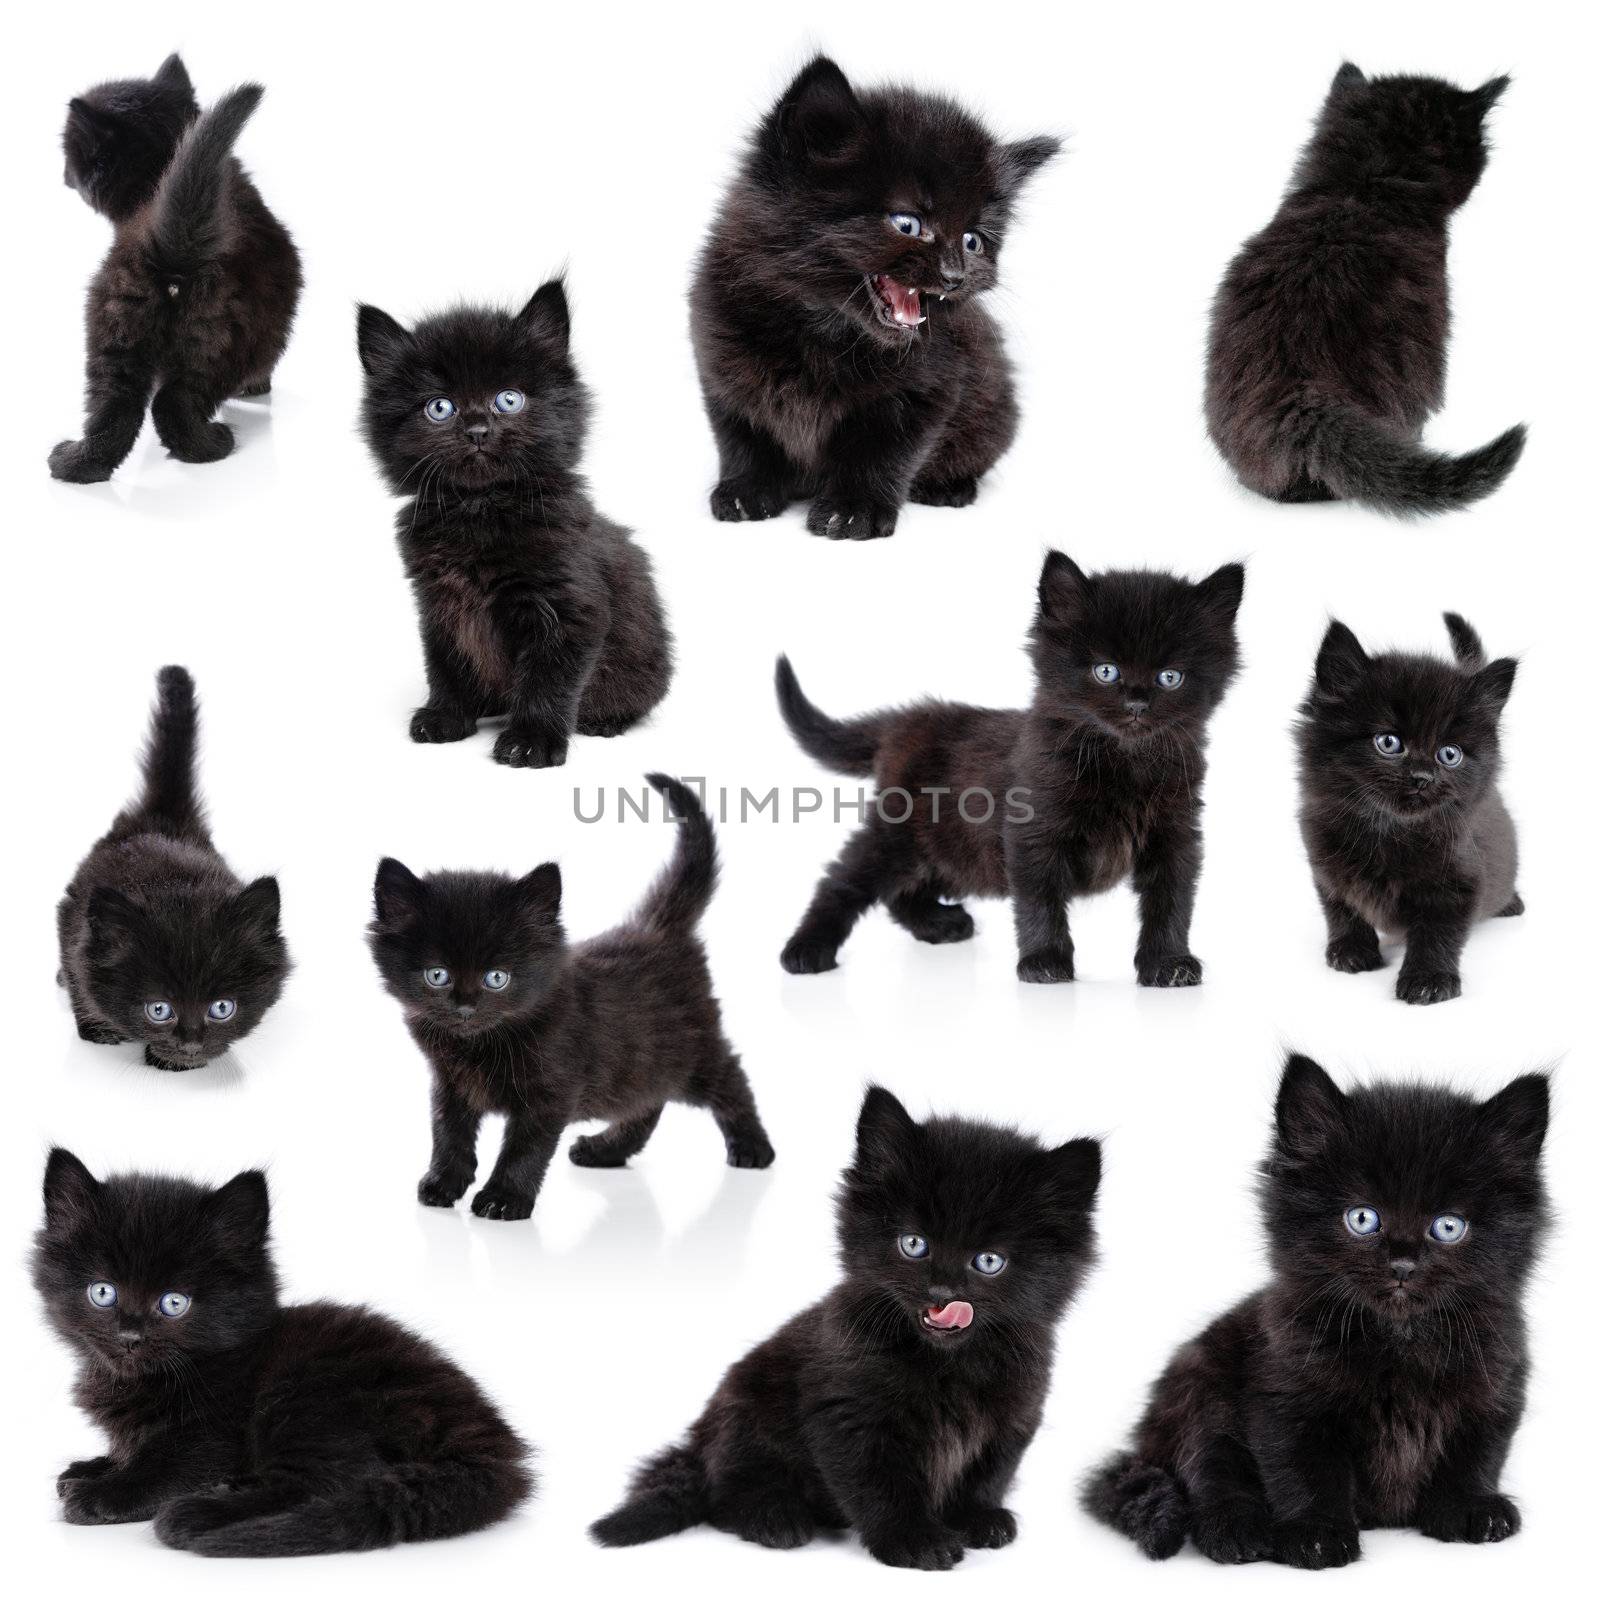 Collection of the same black little kitten on white background